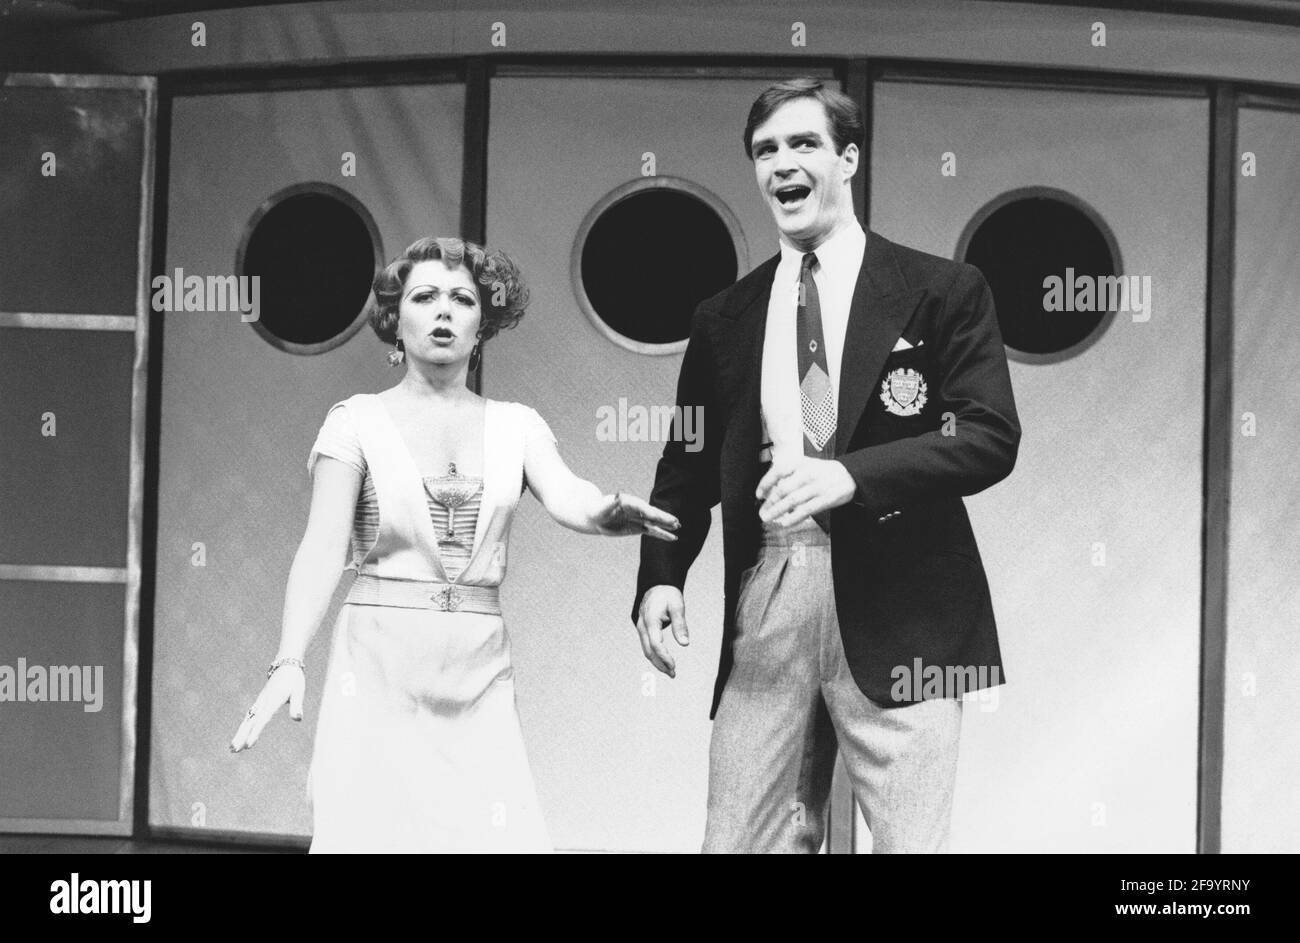 Elaine Paige (Reno Sweeney), Howard McGillin (Billy Crocker)  in ANYTHING GOES at the Prince Edward Theatre, London W1  04/07/1989  a Lincoln Center Production  music & lyrics: Cole Porter  original book: P.G.Wodehouse & Guy Bolton  new book: Timothy Crouse, John Weidman, Howard Lindsay & Russel Crouse  design: Tony Walton  lighting: Paul Gallo  choreography: Michael Smuin  director: Jerry Zaks Stock Photo